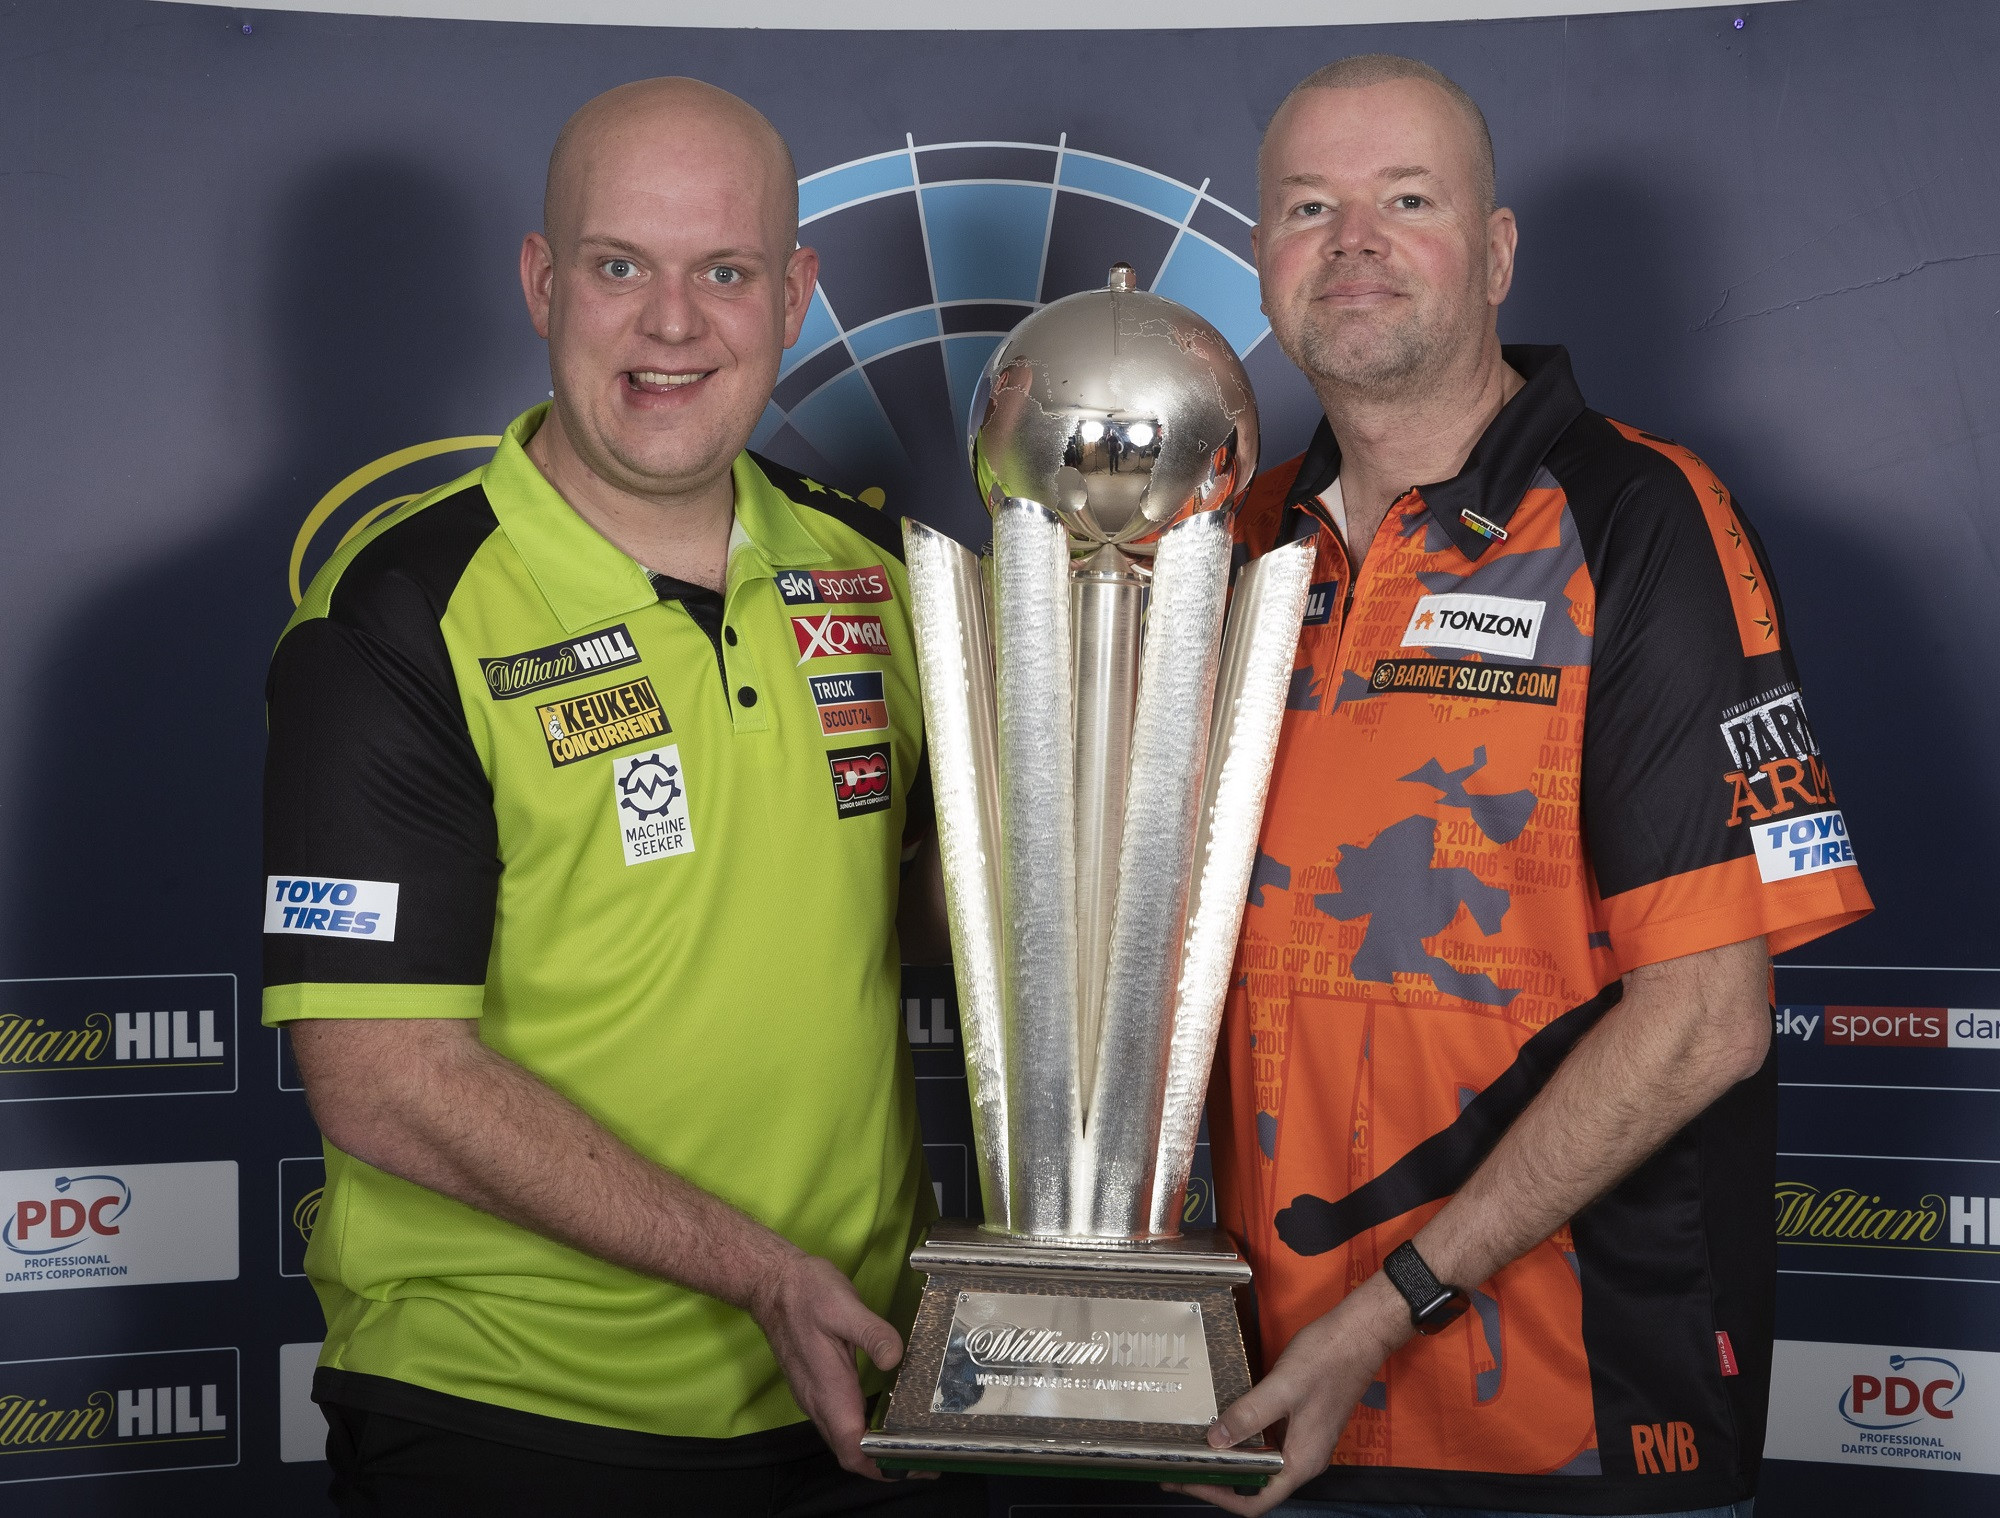 Current PDC World Champion Michael Van Gerwen, left, pictured with the trophy that he will defend at the Championships that start on Friday alongside fellow Dutchman and past winner Raymond Van Barneveld, whose last Championship this will be ©PDC